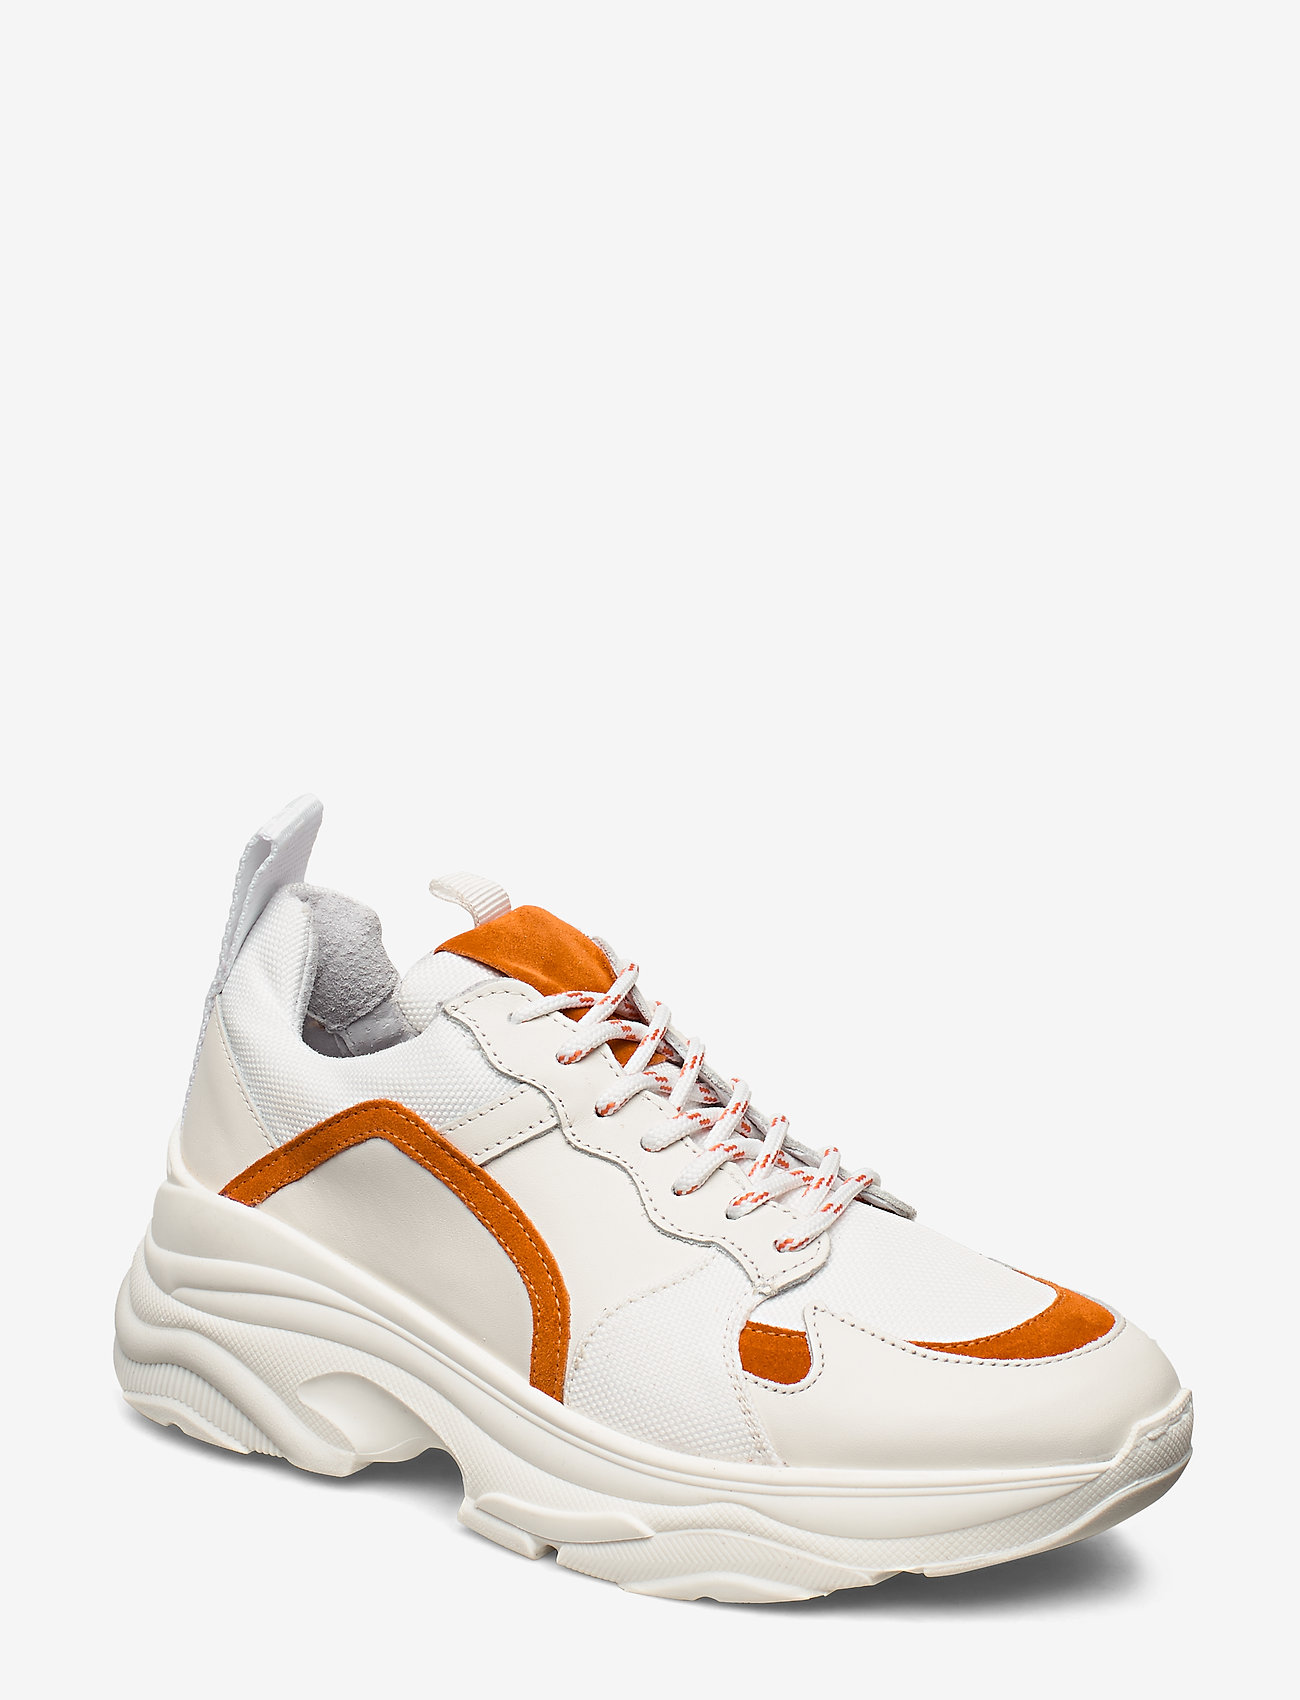 pavement chunky sneakers